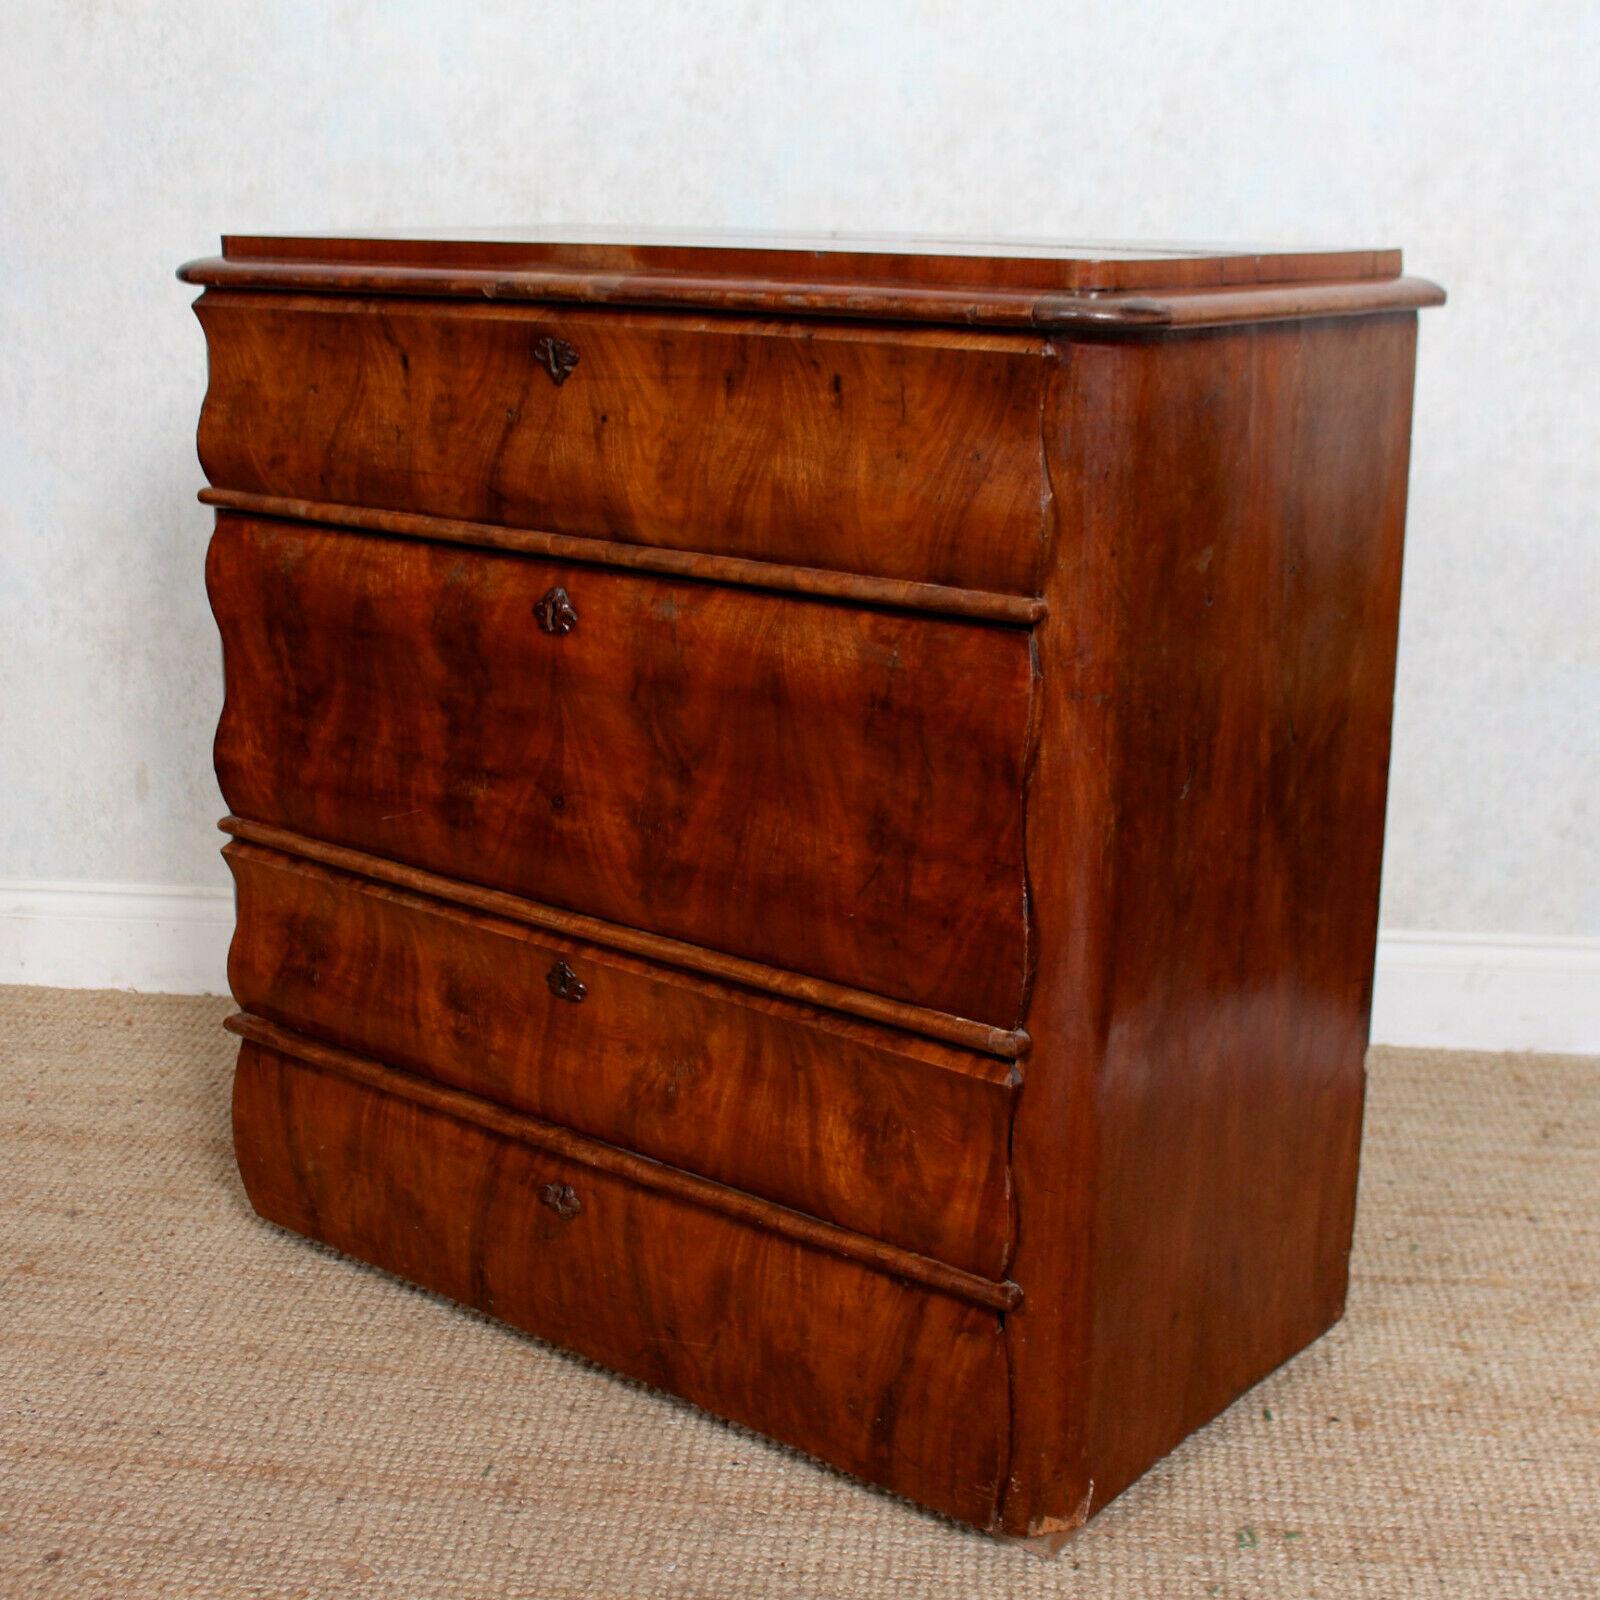 A stunning 19th century Swedish Biedermeier flamed mahogany chest of drawers.
The shaped and stepped top above an arrangement of four cushion shaped drawers and raised on block feet.
Chips to marquetry veneers.
Sweden, circa 1860.